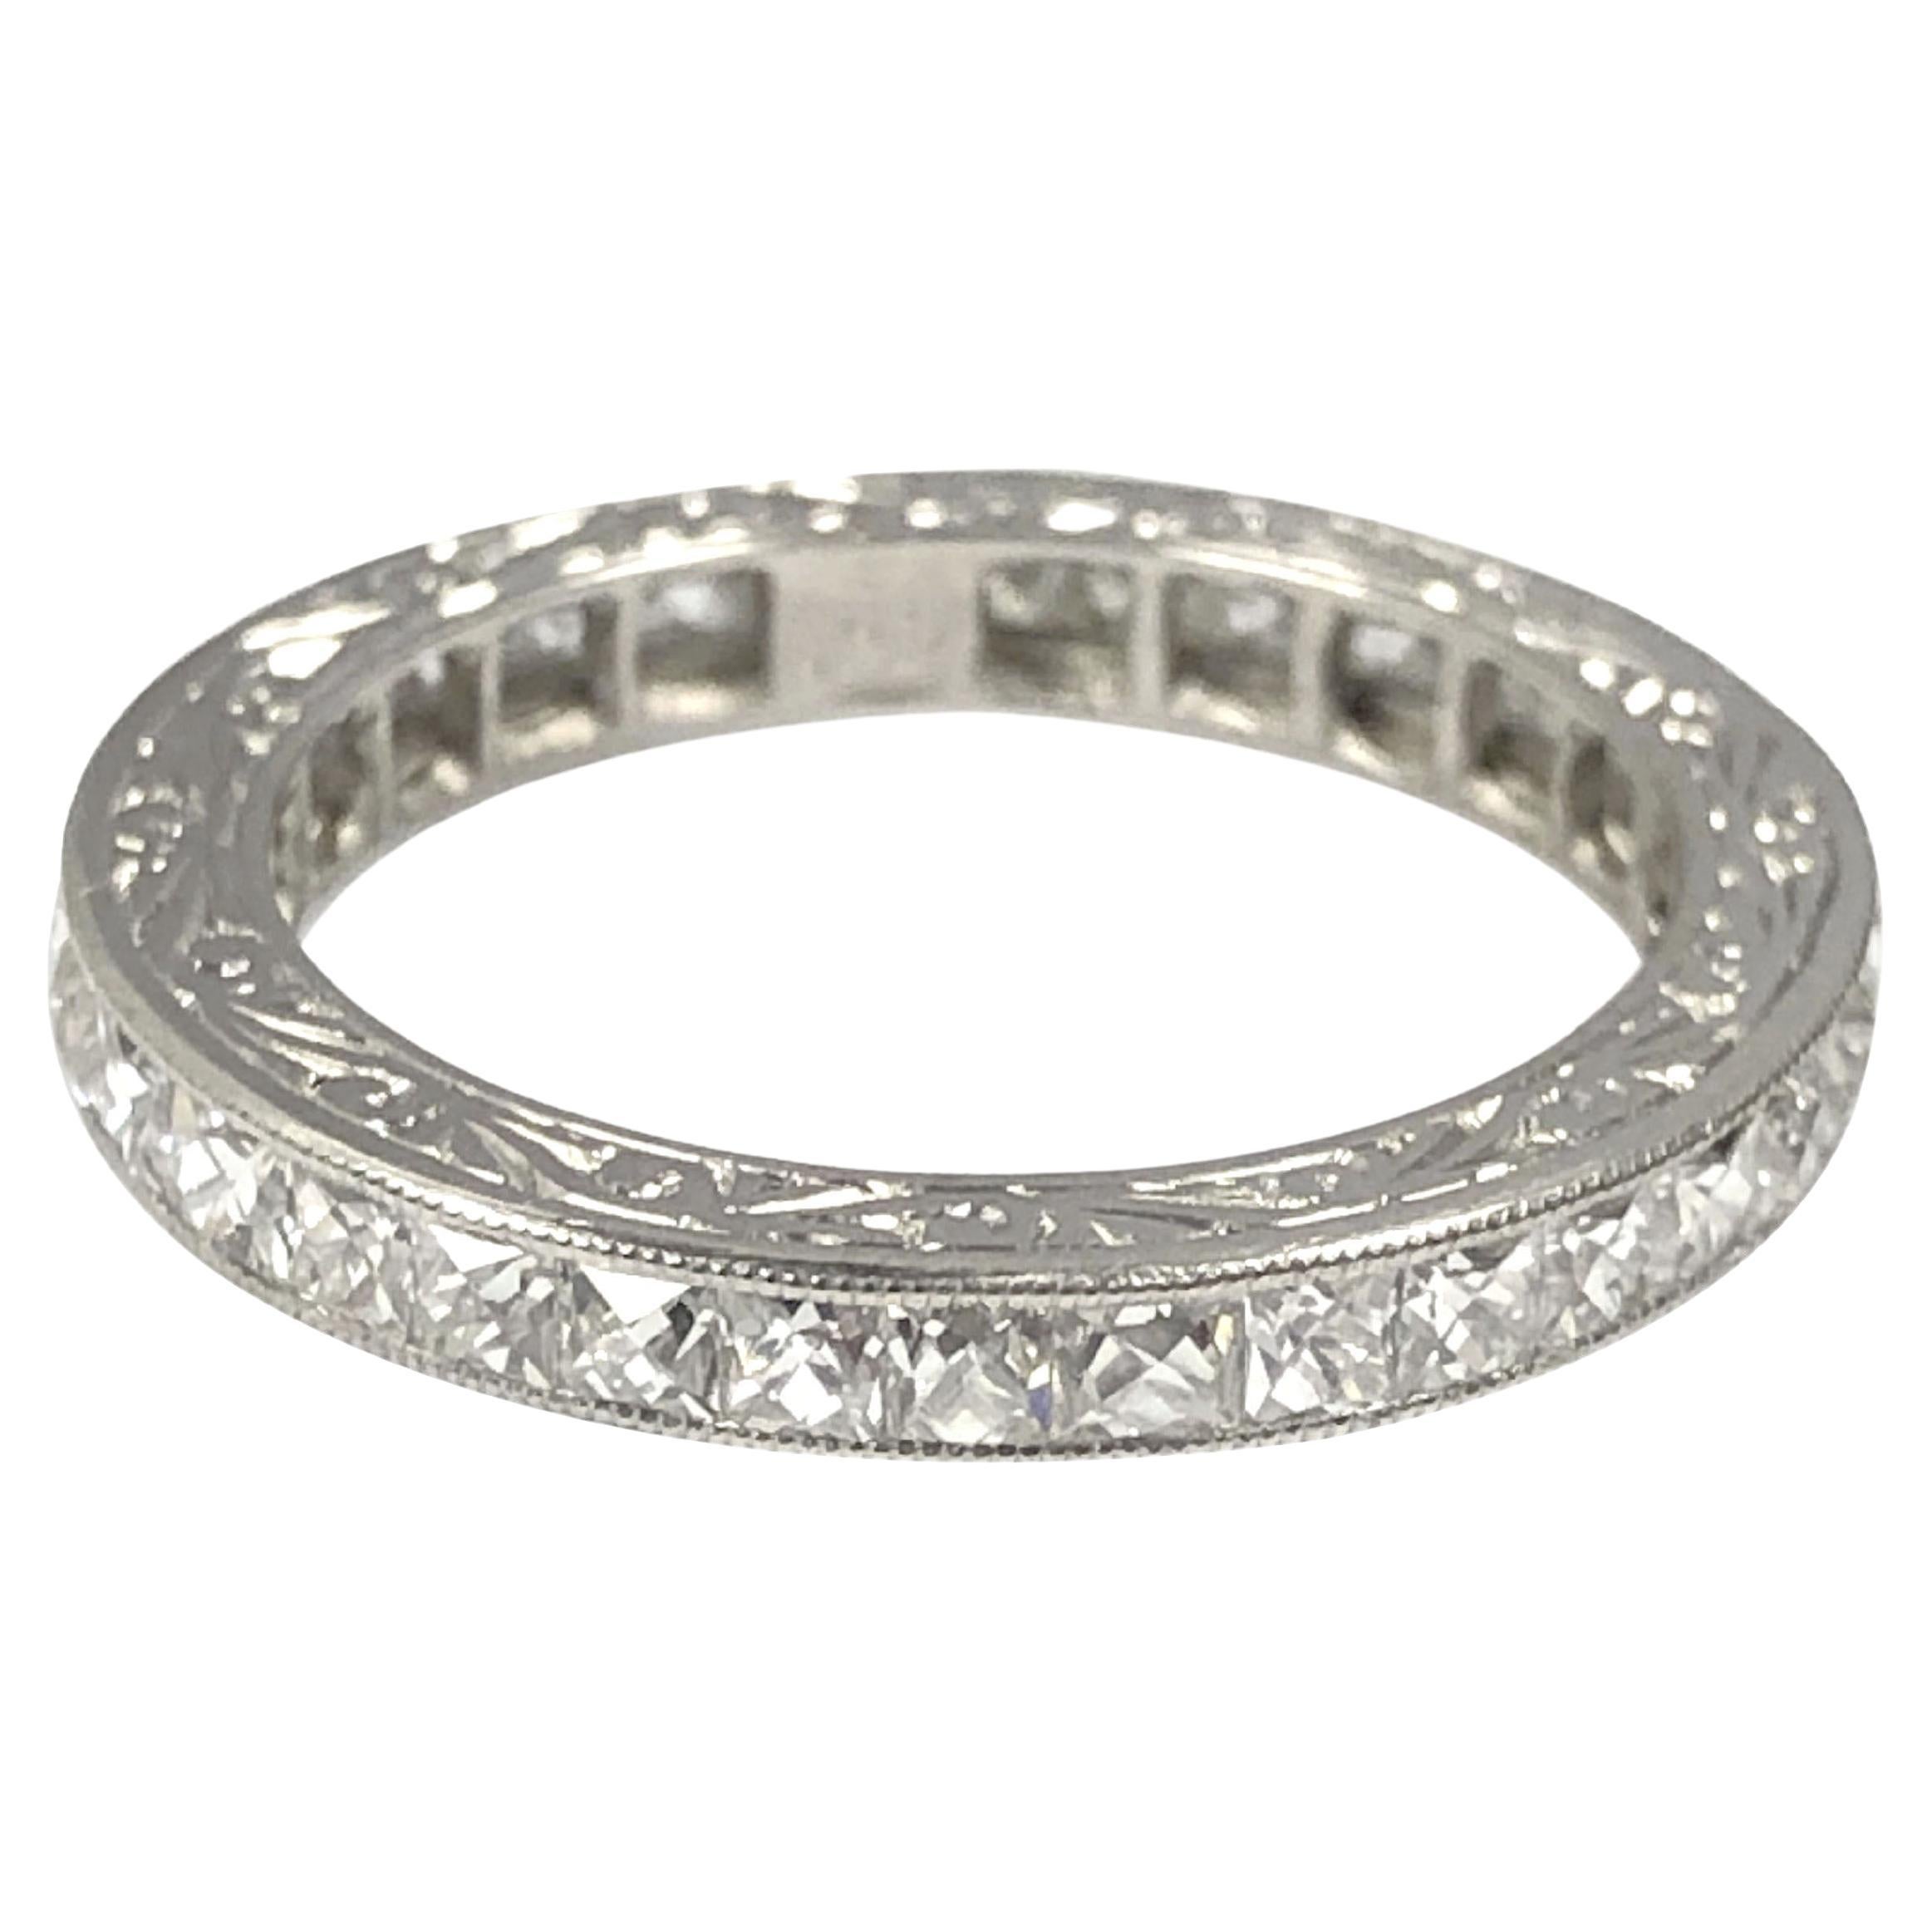 Platinum and 2 Carats French Cut Diamonds Eternity Band Ring